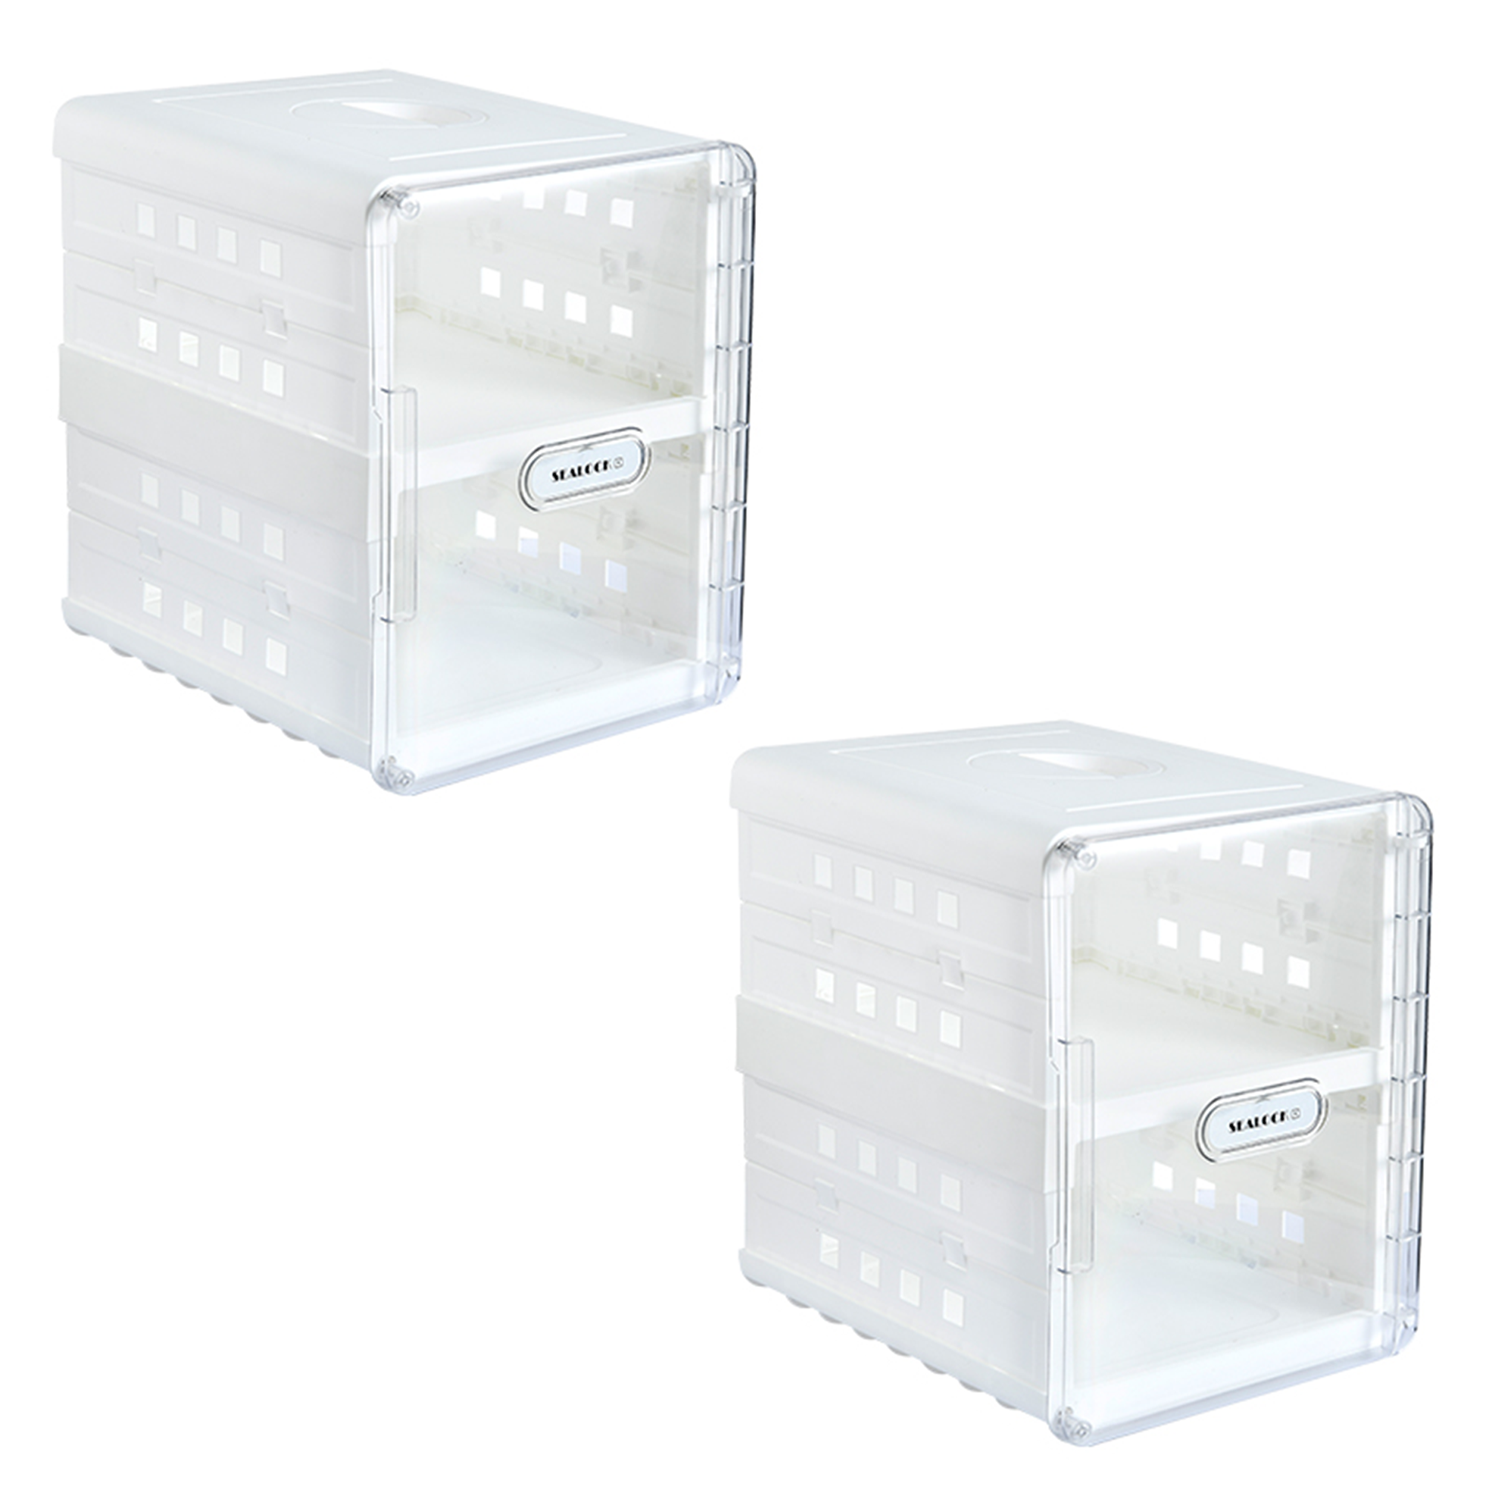 2 Tier Shoe Storage Box / Transparent Storage Basket With Door / Shoe Stash with Air Passing Holes and Handle